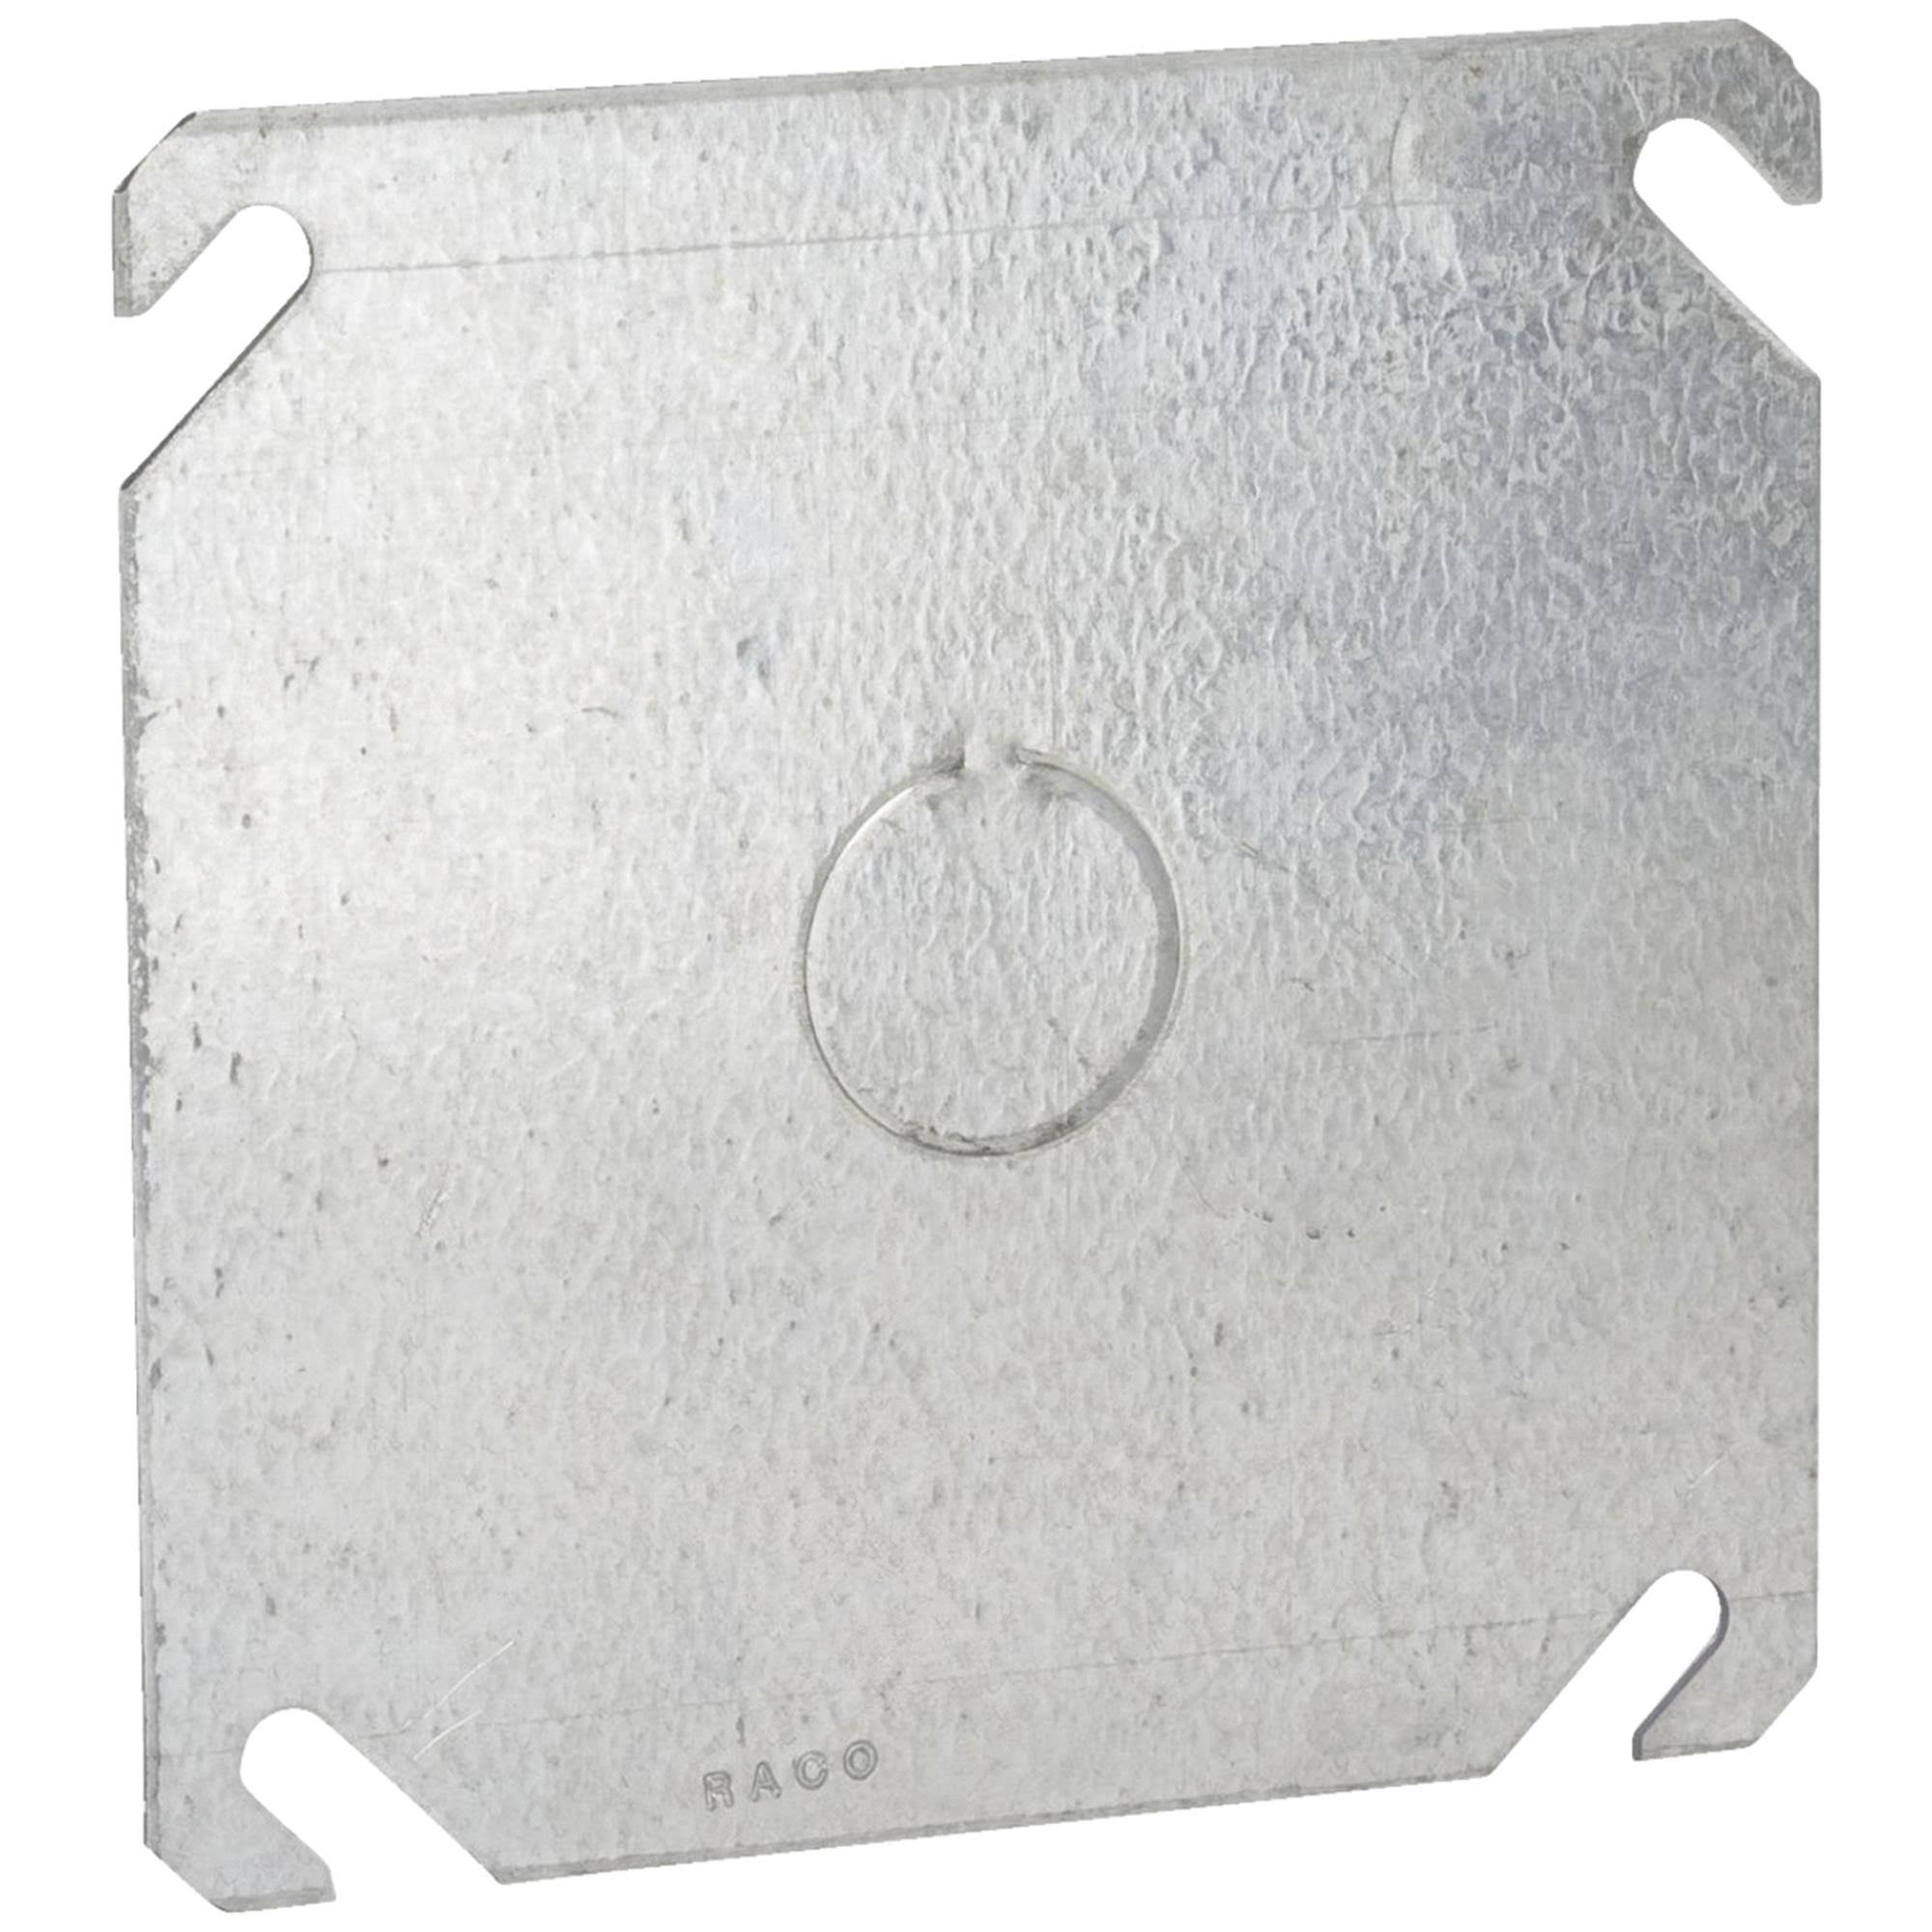 Raco 4" Square Steel Cover with 1/2" Knockout Seal